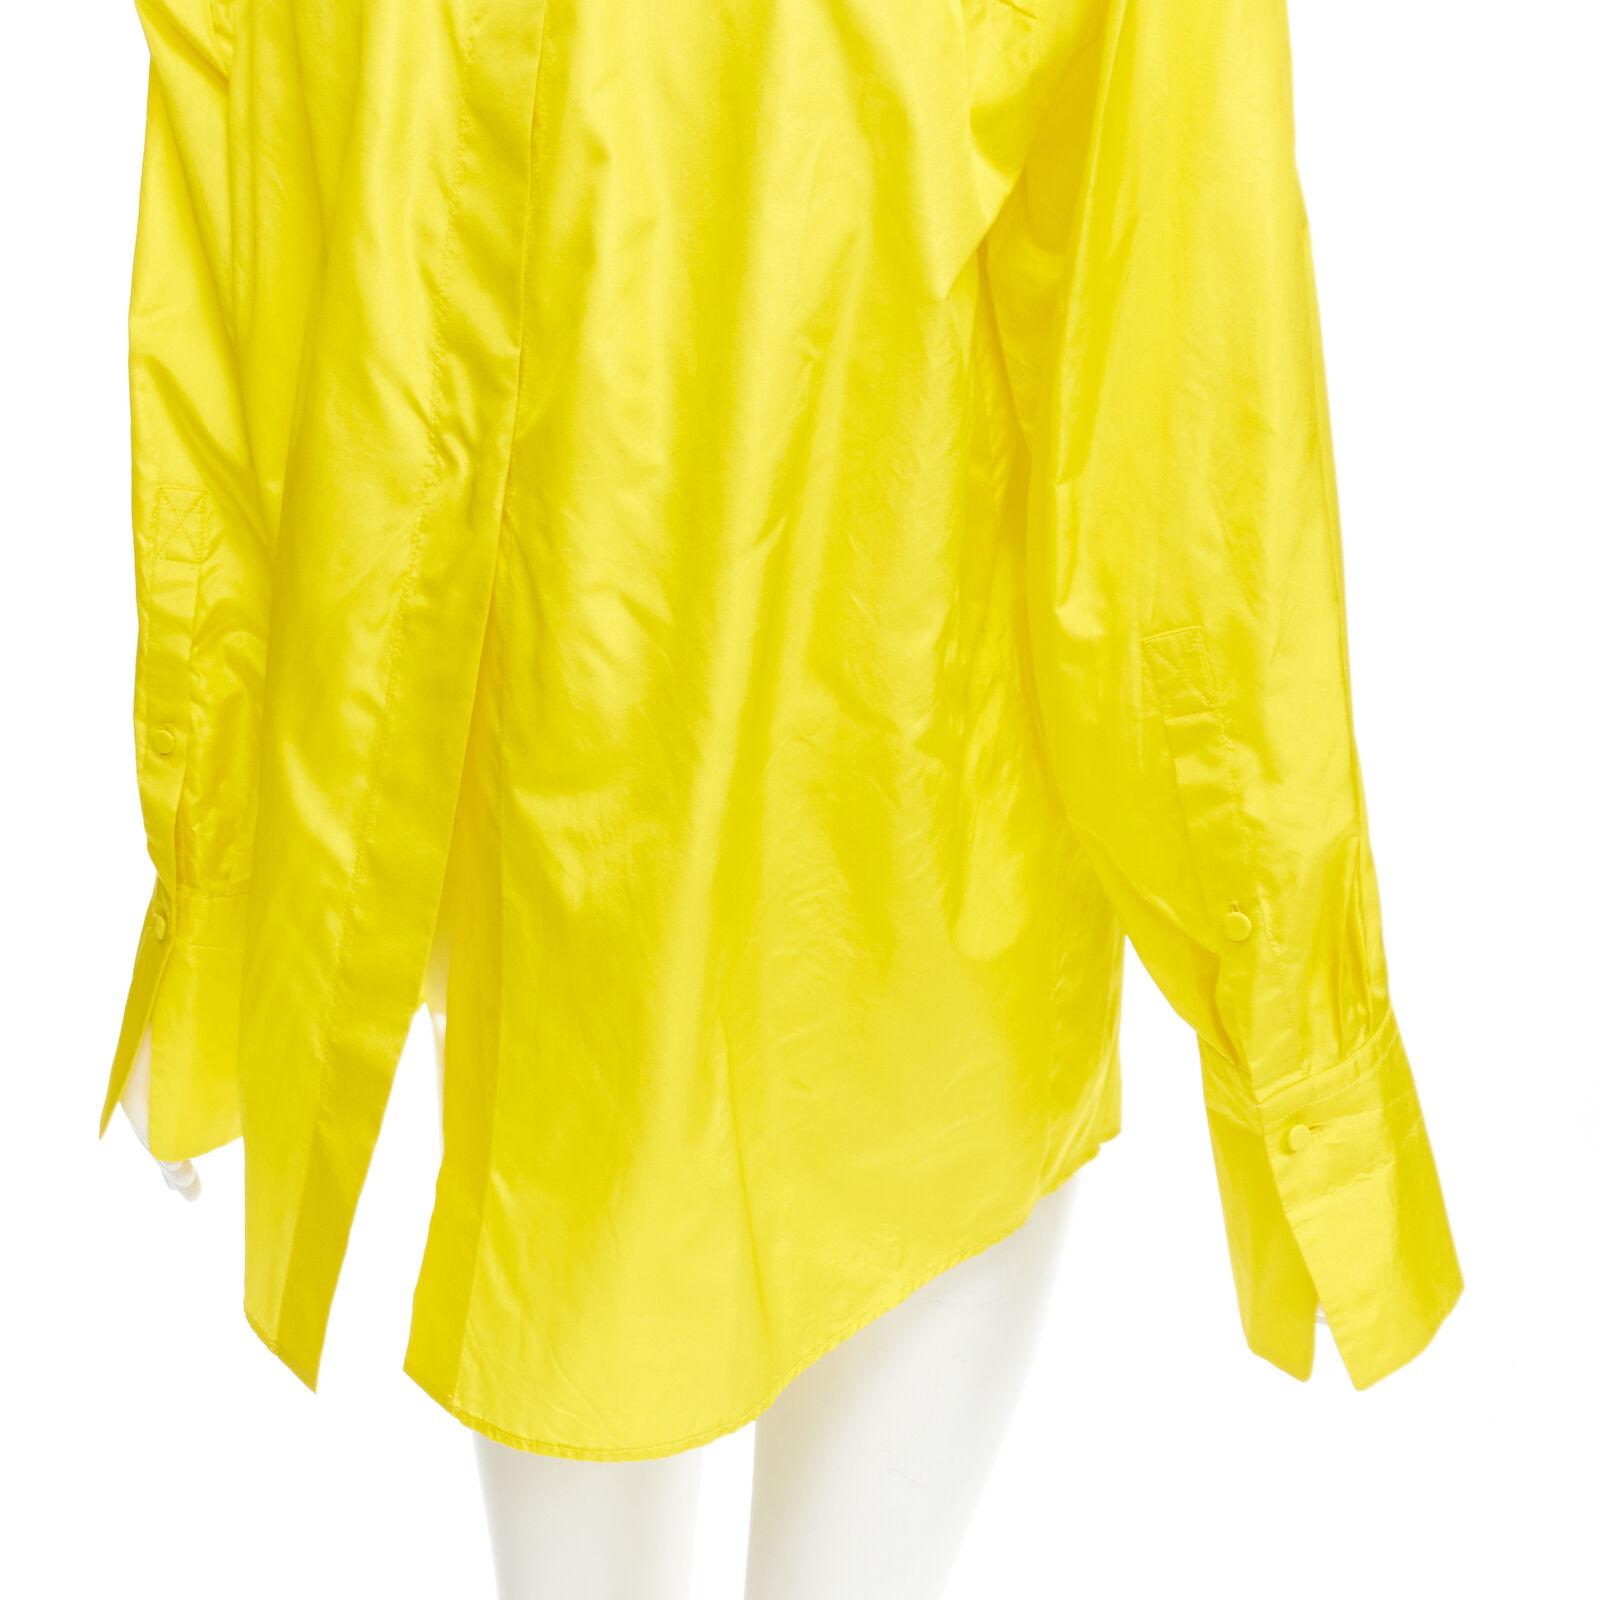 VALENTINO 2022 Runway yellow silk taffeta back slit boxy oversized shirt IT38 XS
Reference: AAWC/A00269
Brand: Valentino
Designer: Pier Paolo Piccioli
Collection: 2022 - Similar design on the Runway
Material: 100% Silk
Color: Yellow
Pattern: